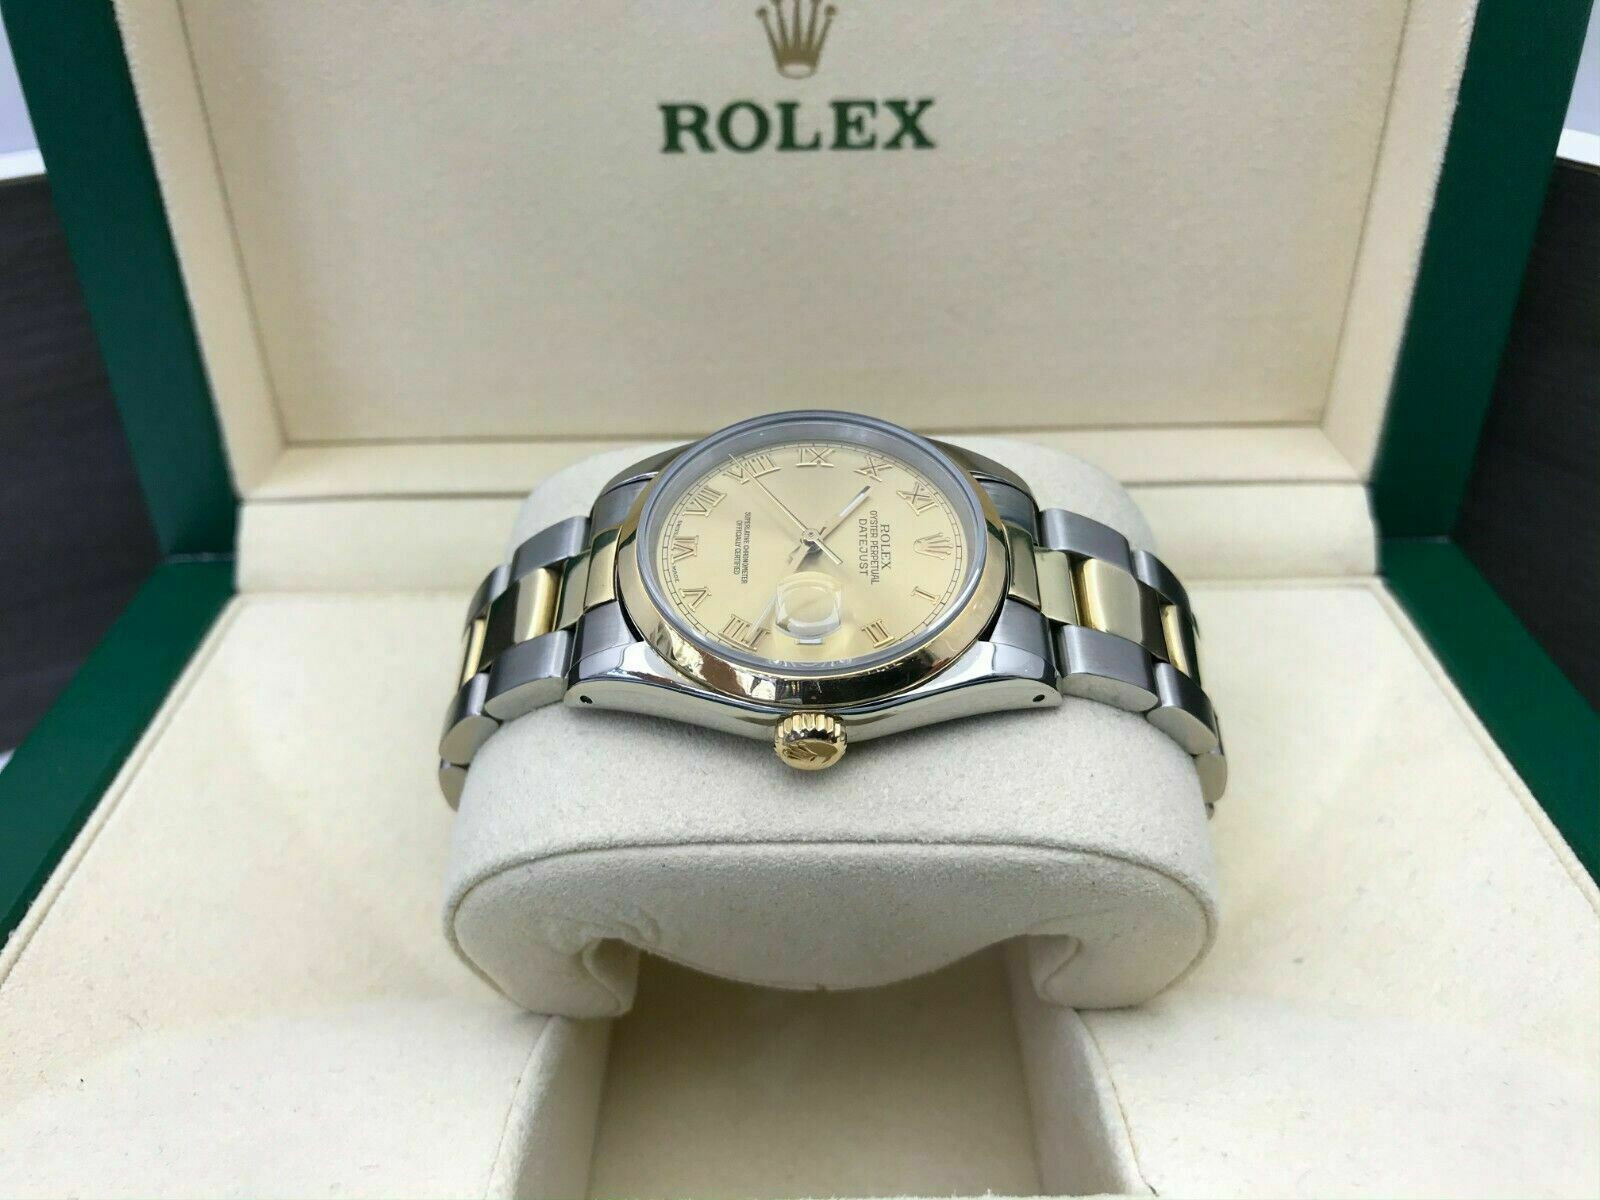 Rolex Datejust 36mm 18k Gold and Steel Watch Roman Dial Smooth Bezel 16233